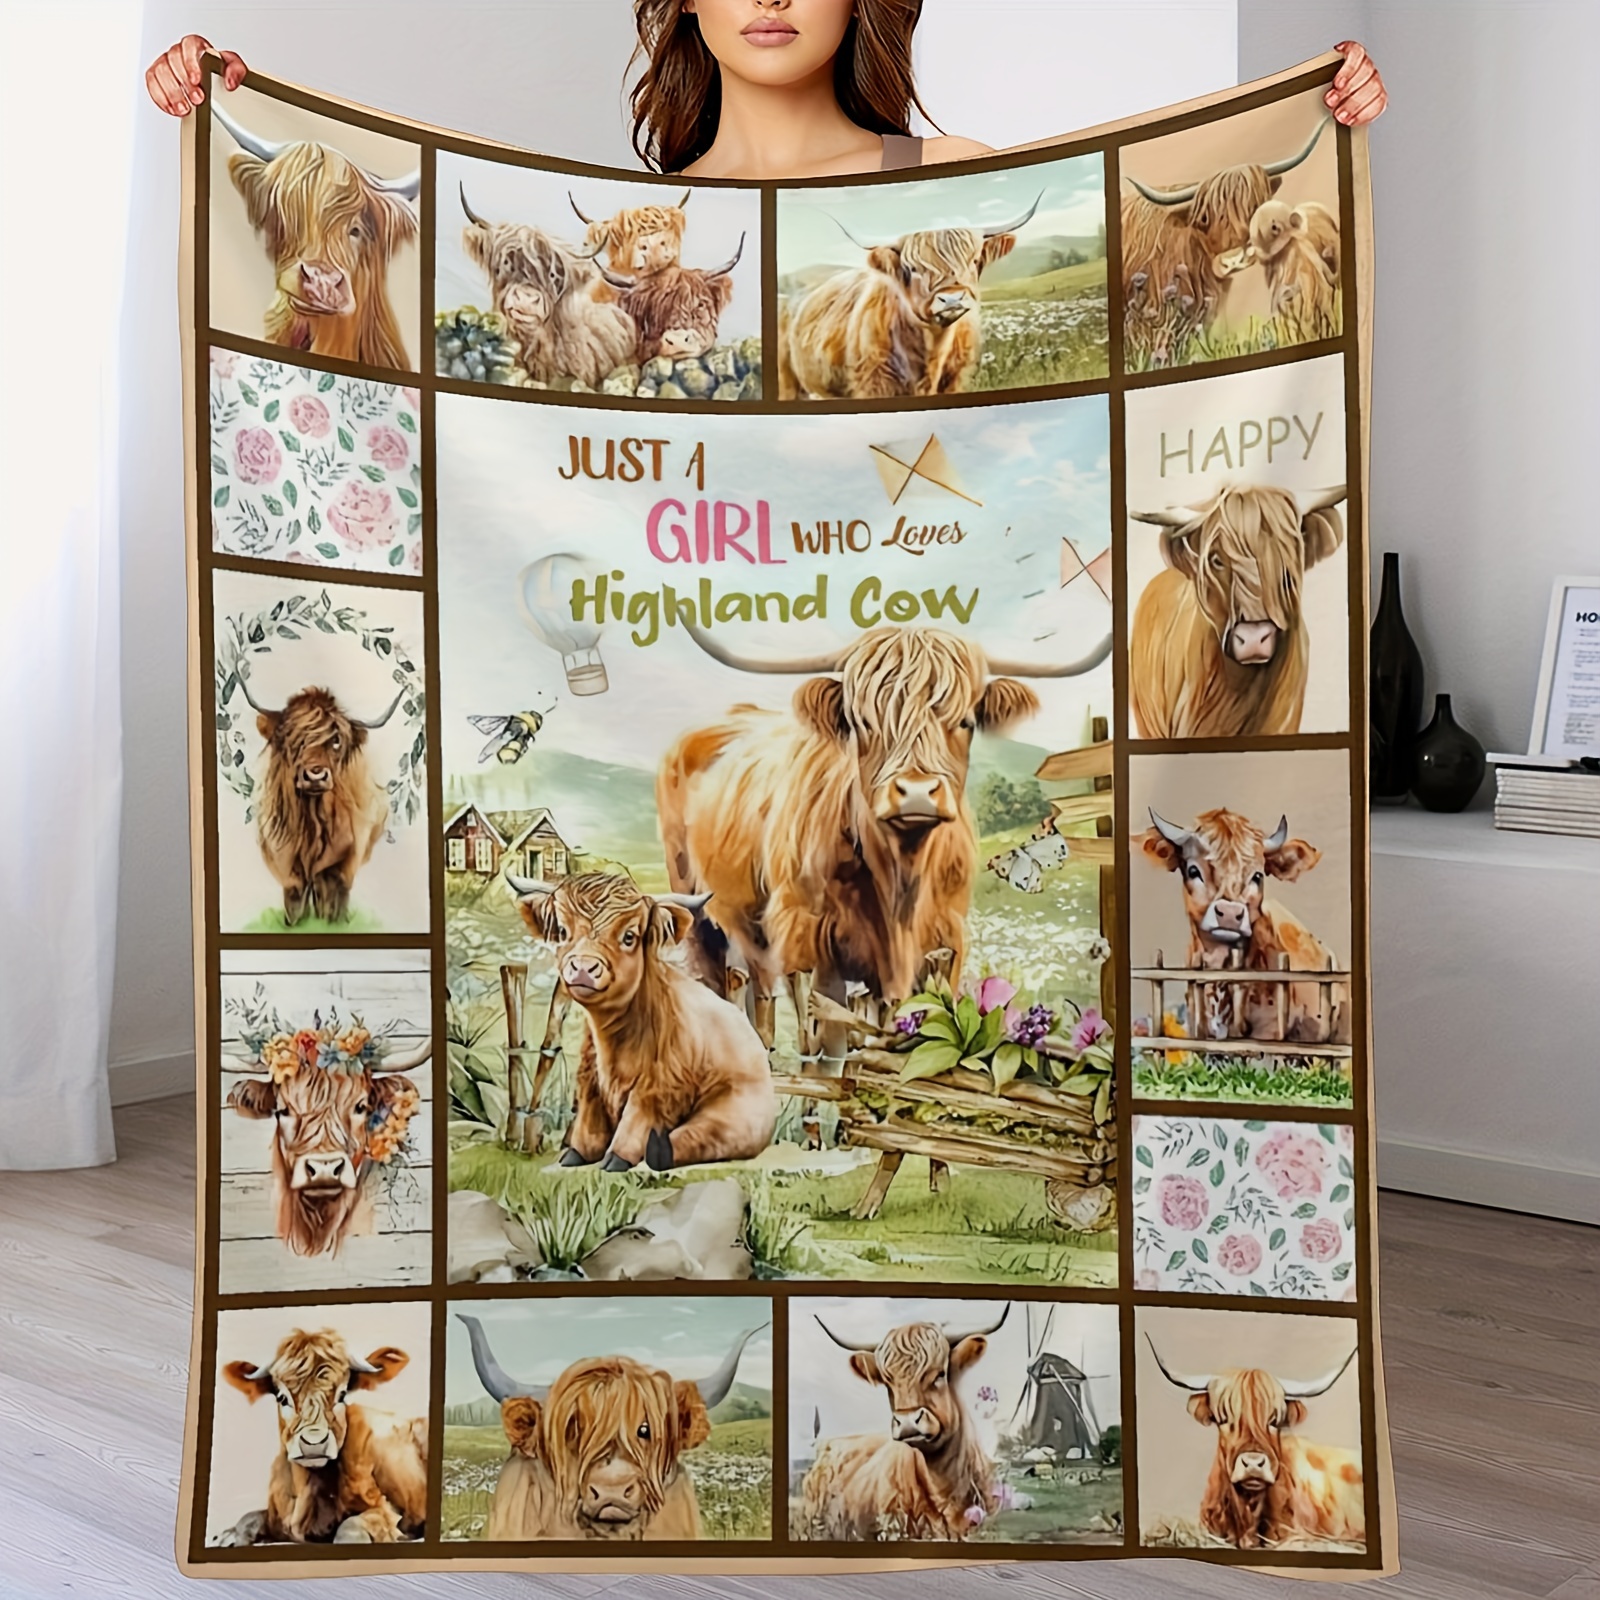 

Highland Cow Print Blanket And Throws Cute Farm Animal Cow Gifts Throw Blankets Soft Cozy Plush Warm Bedding Blanket For Adults Couch Travel